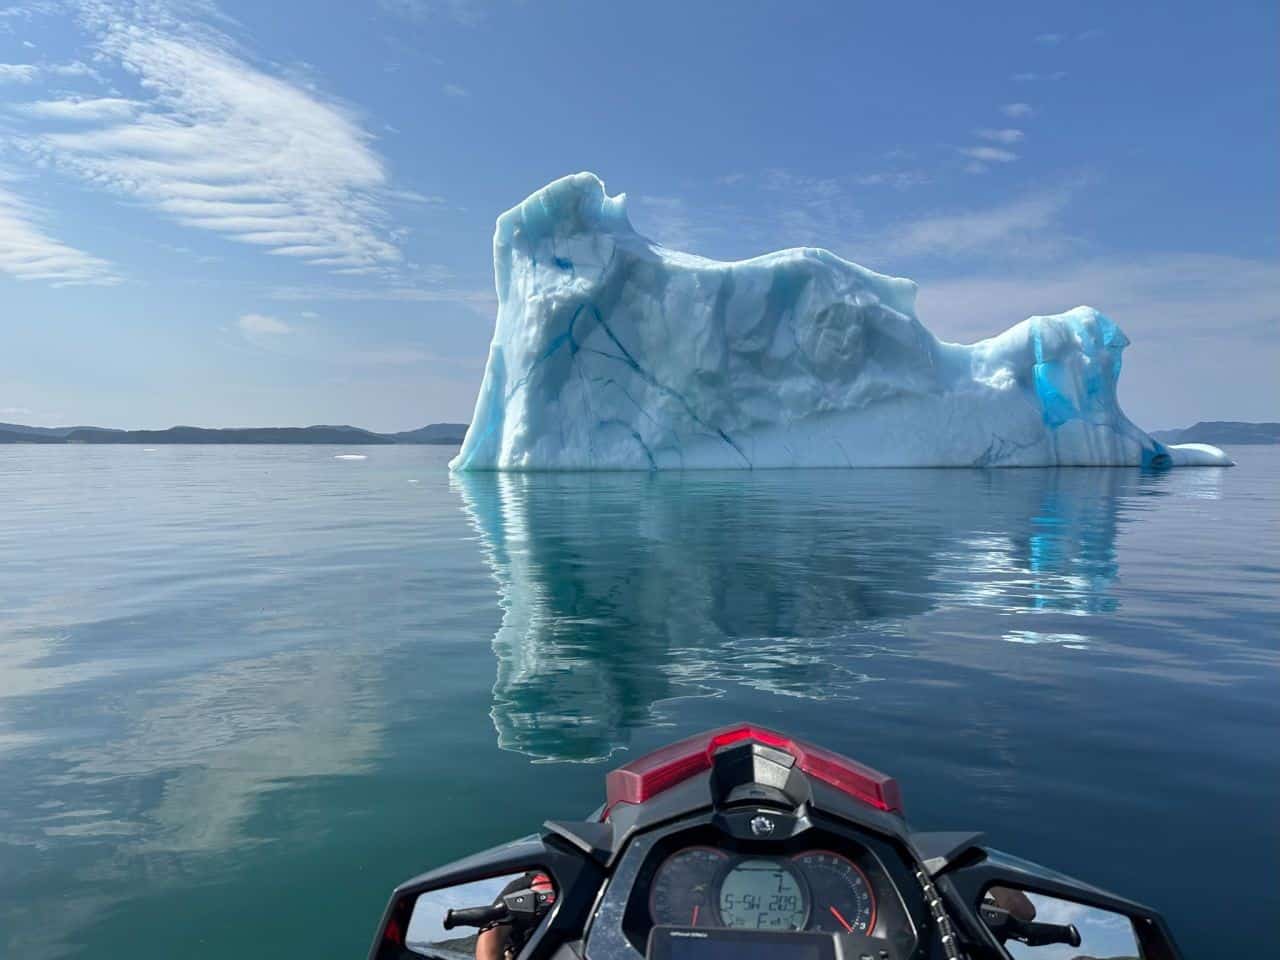 Reflections of an iceberg during Summer in Newfoundland and Labrador Canada from a jet ski.